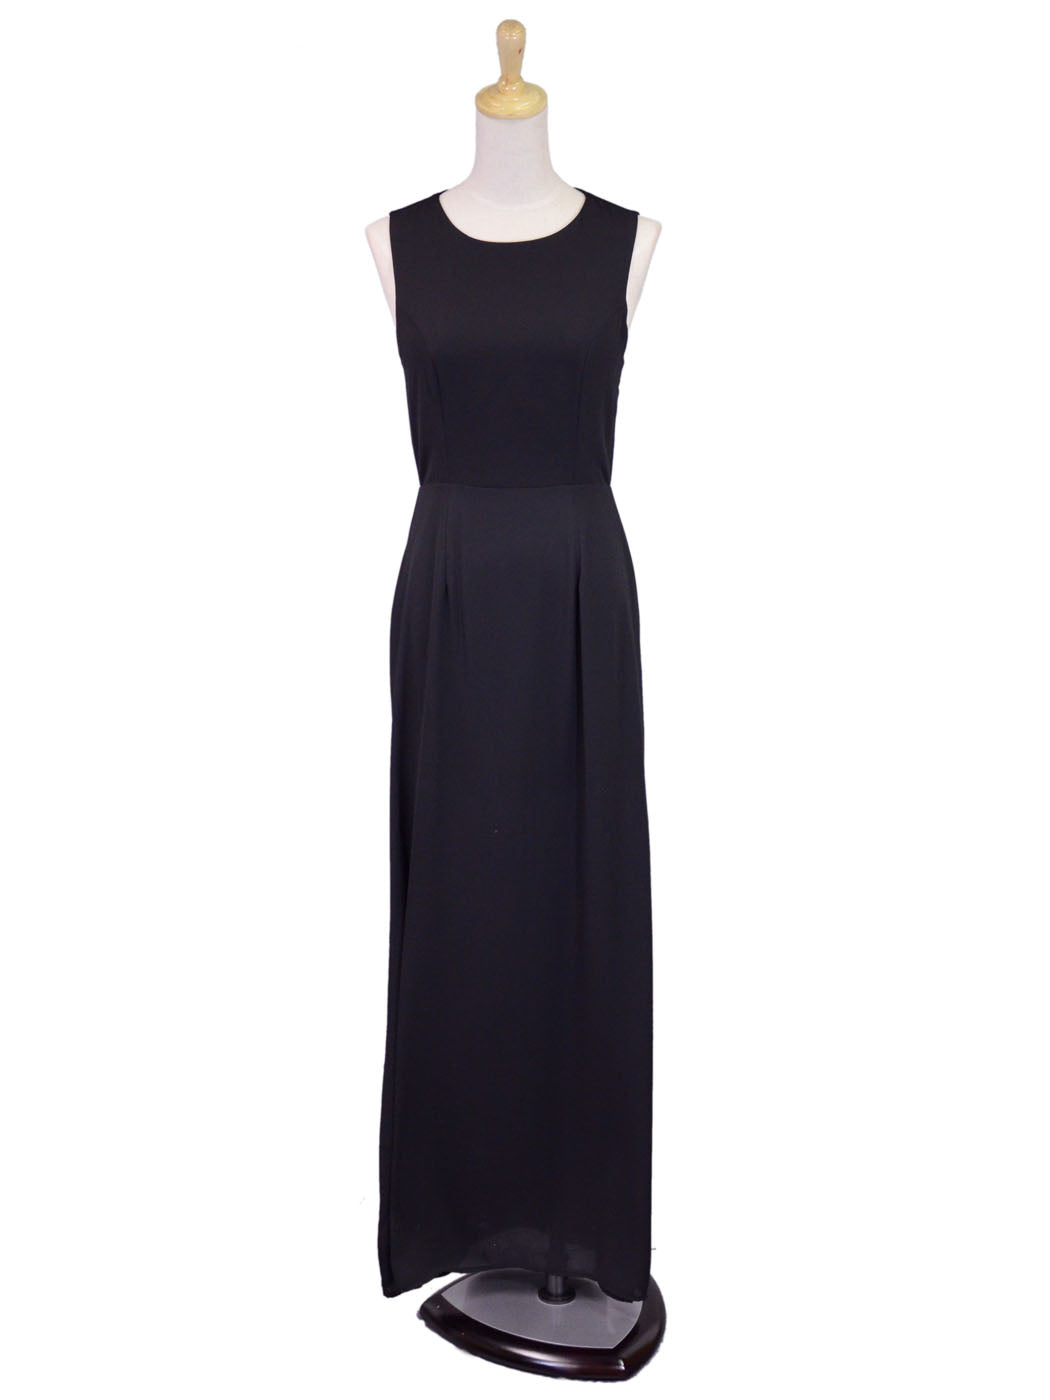 Everly Classy Sleeveless Maxi Dress With Lower Back Cutouts And One Side Slit - ALILANG.COM